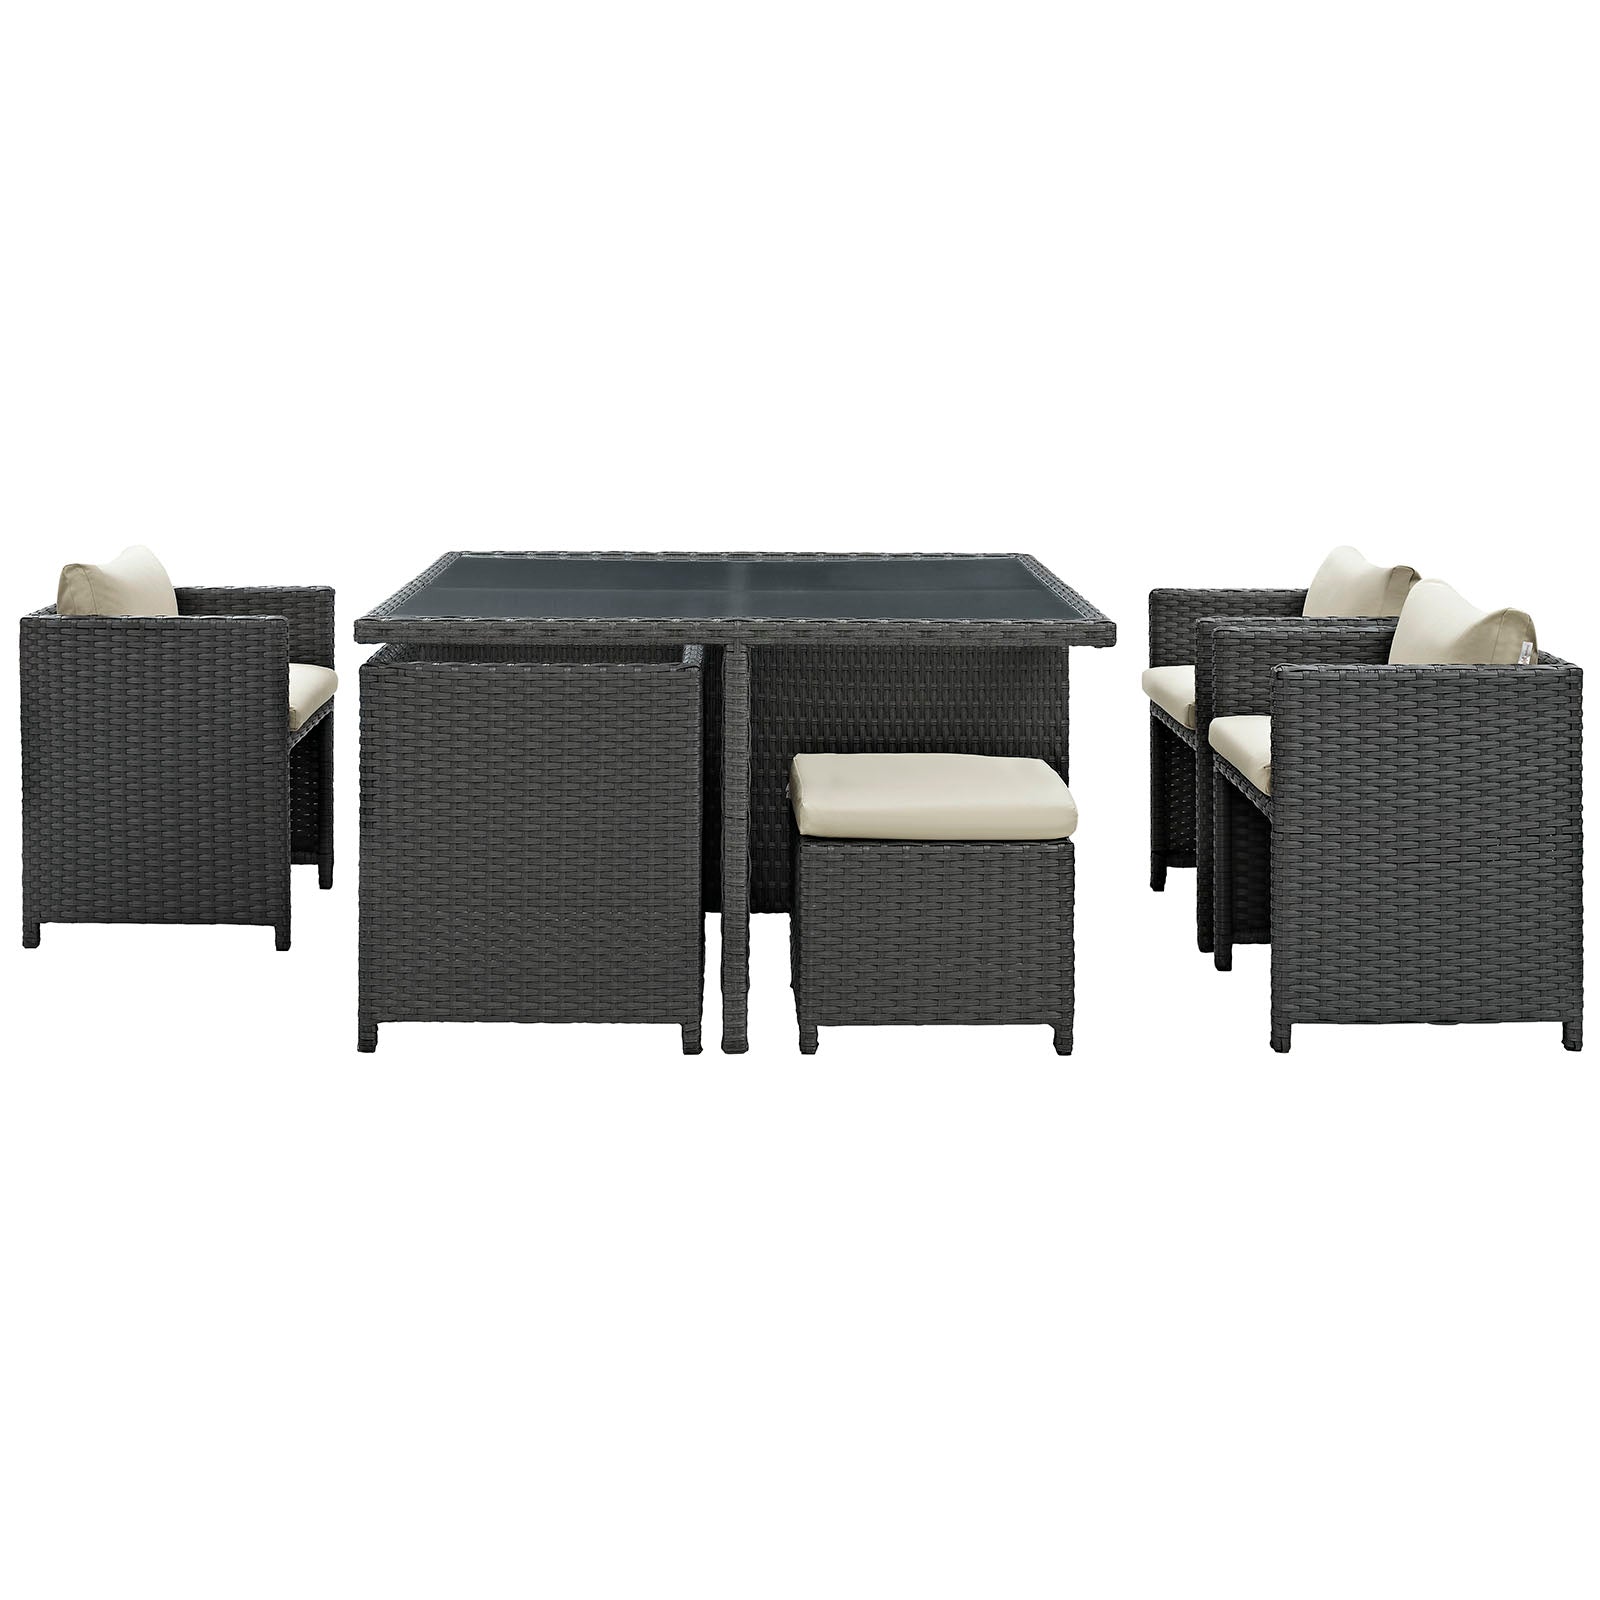 Modway Outdoor Dining Sets - Sojourn 9 Piece Outdoor Patio Sunbrella Dining Set Antique Canvas Beige